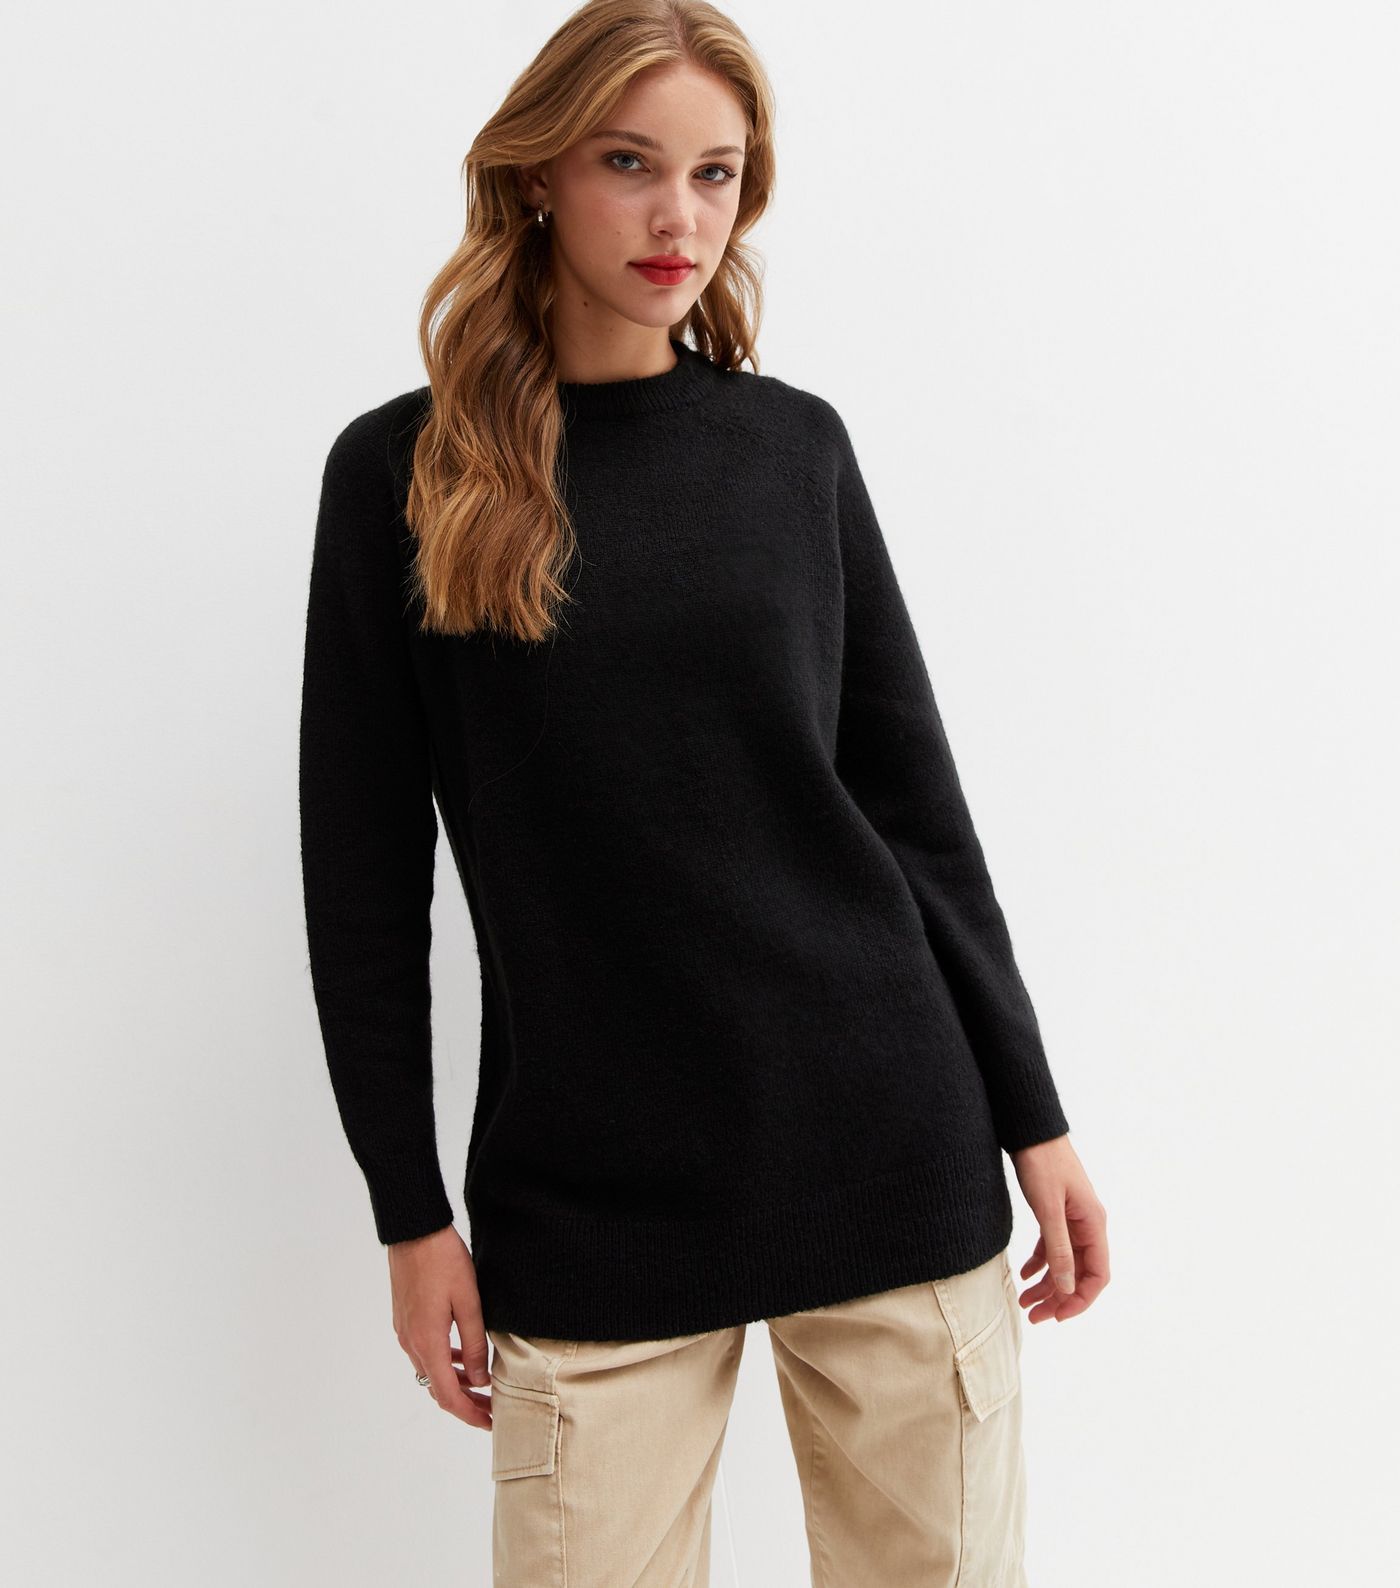 Black Crew Neck Long Jumper
						
						Add to Saved Items
						Remove from Saved Items | New Look (UK)